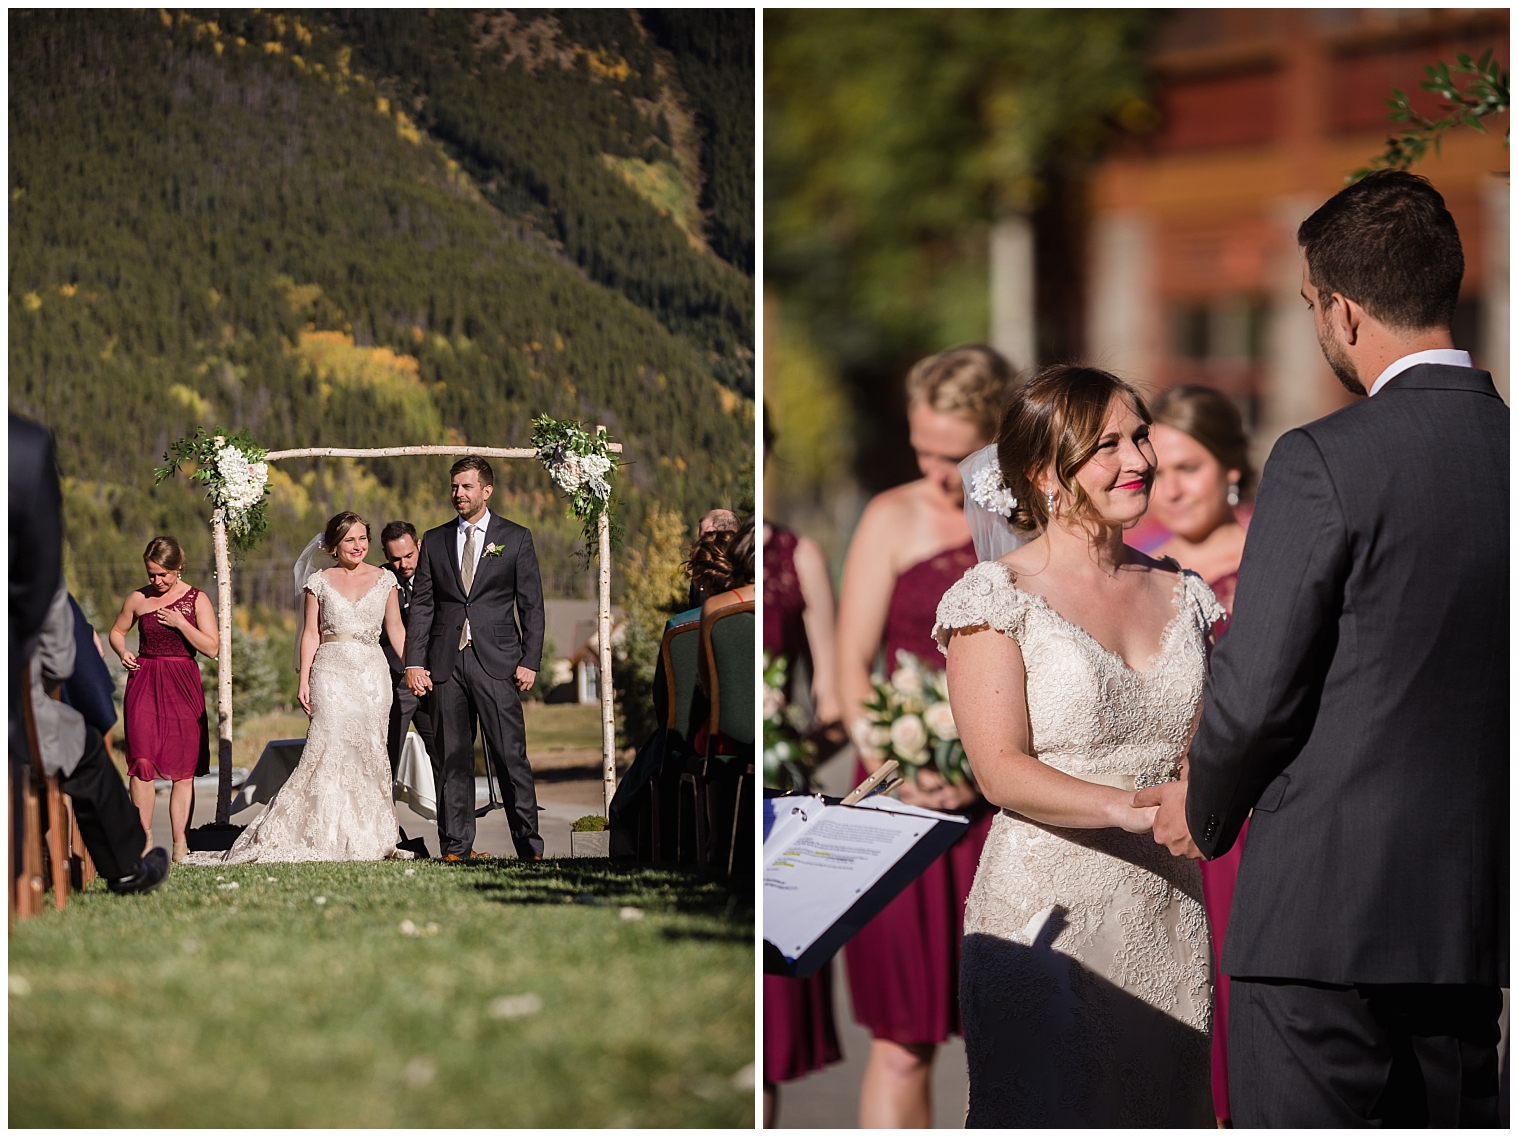 Bride looks up at her groom during their Copper Mountain wedding ceremony.